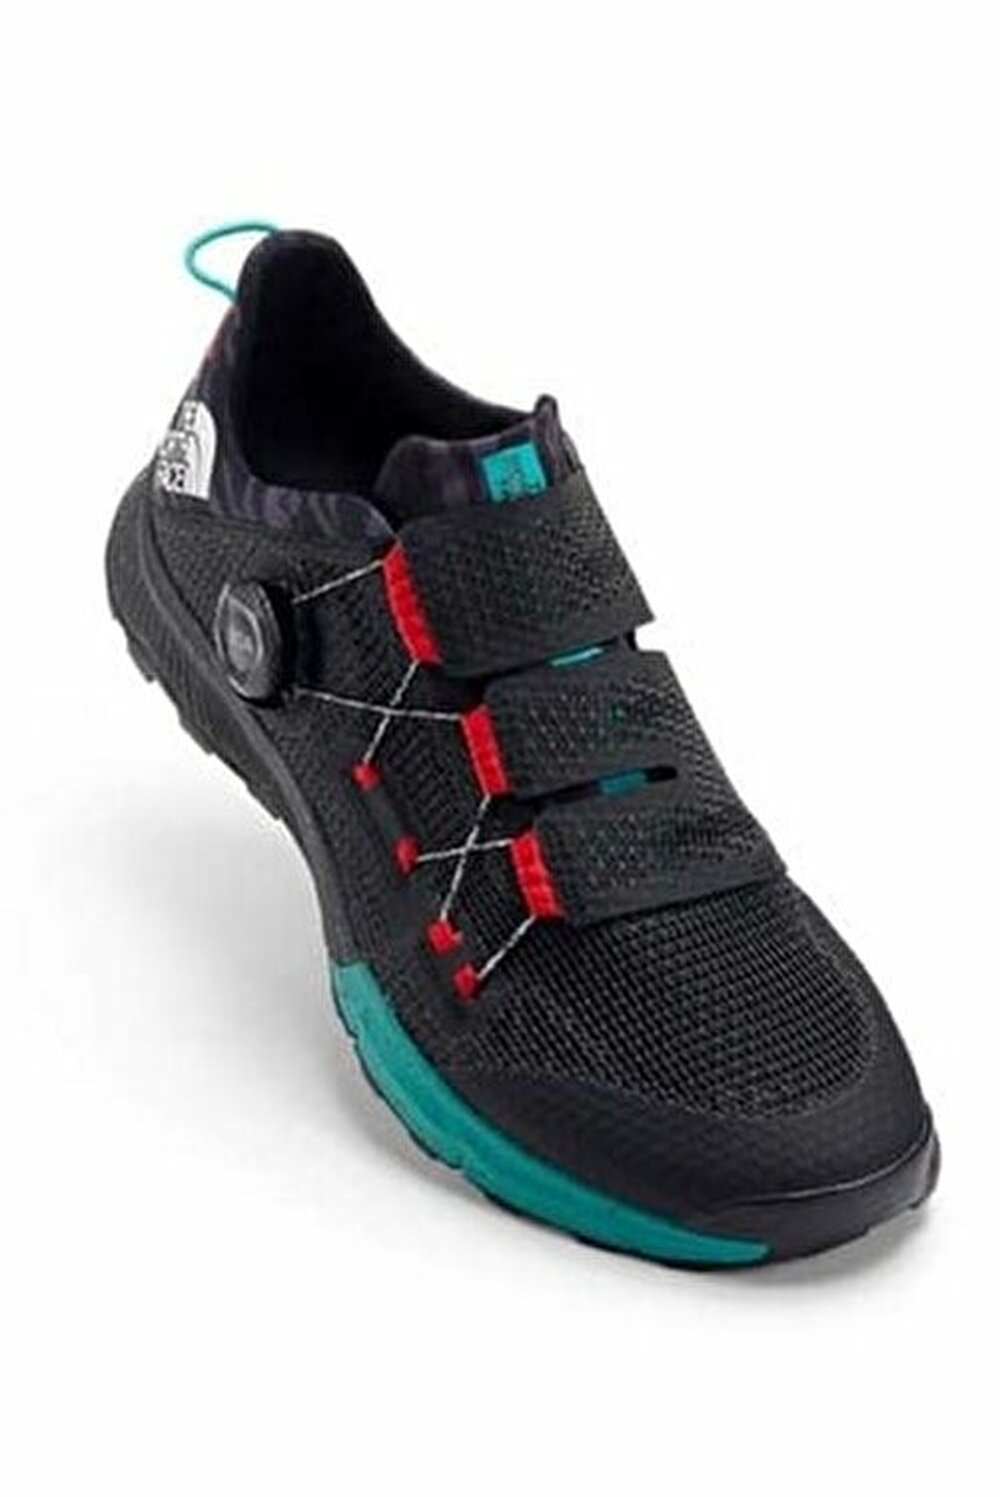 The North Face Summit Cragstone Pro